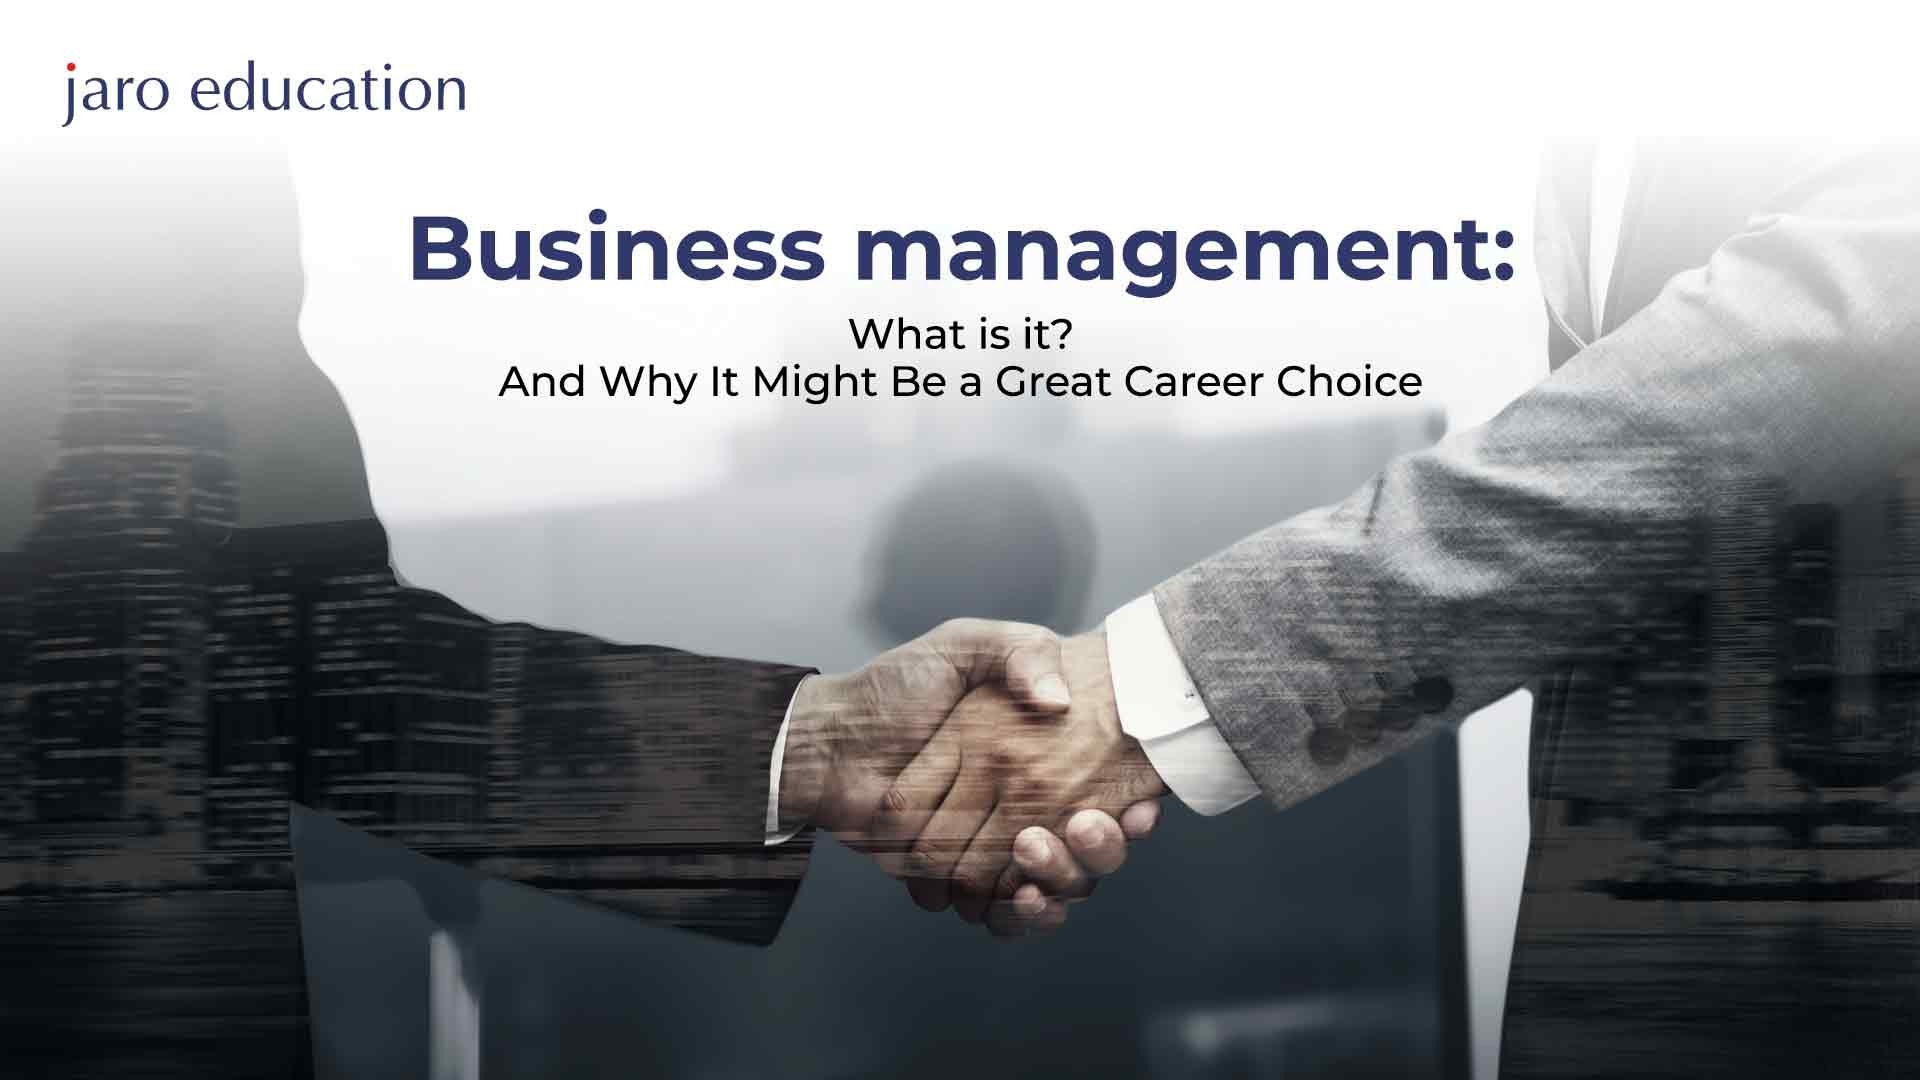 Business-management-What-is-it-And-Why-It-Might-Be-a-Great-Career-Choice_10_11zon jaro